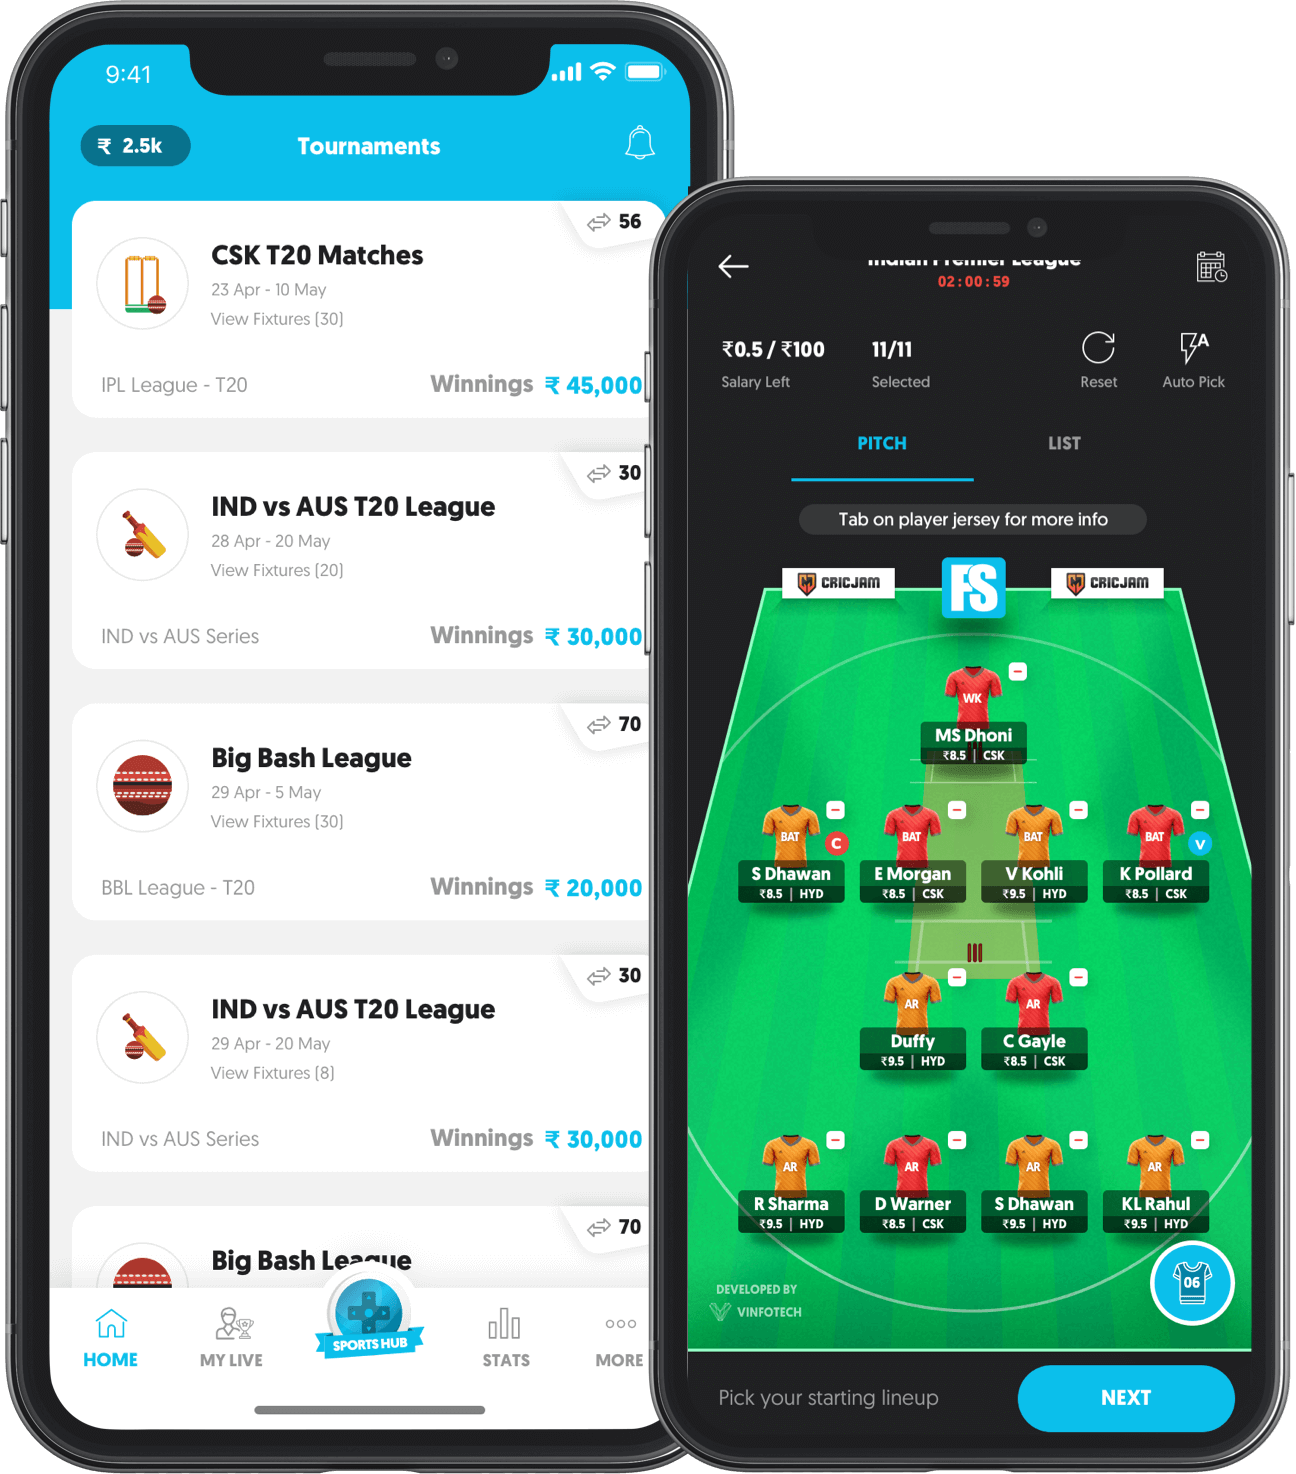 A season-long fantasy sports variant where users draft’s & manages a team for the entire tournament to win developed by Vinfotech